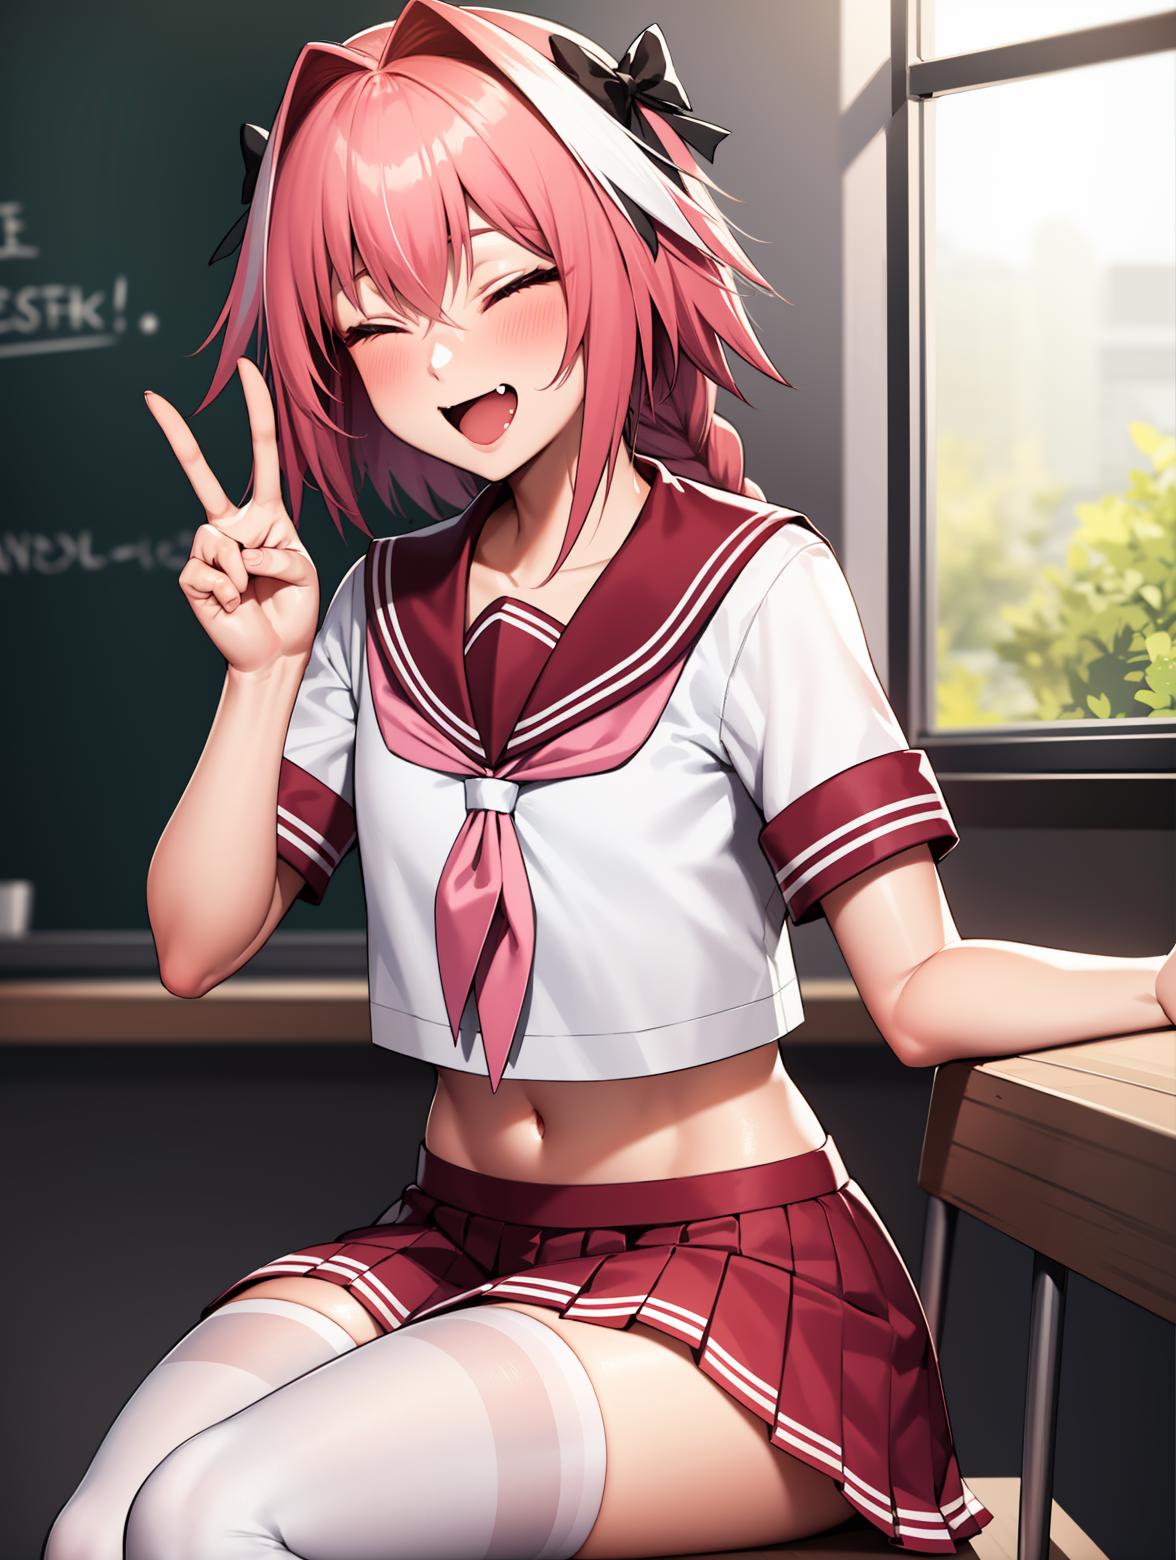 Astolfo (Fate Series) image by Nitram